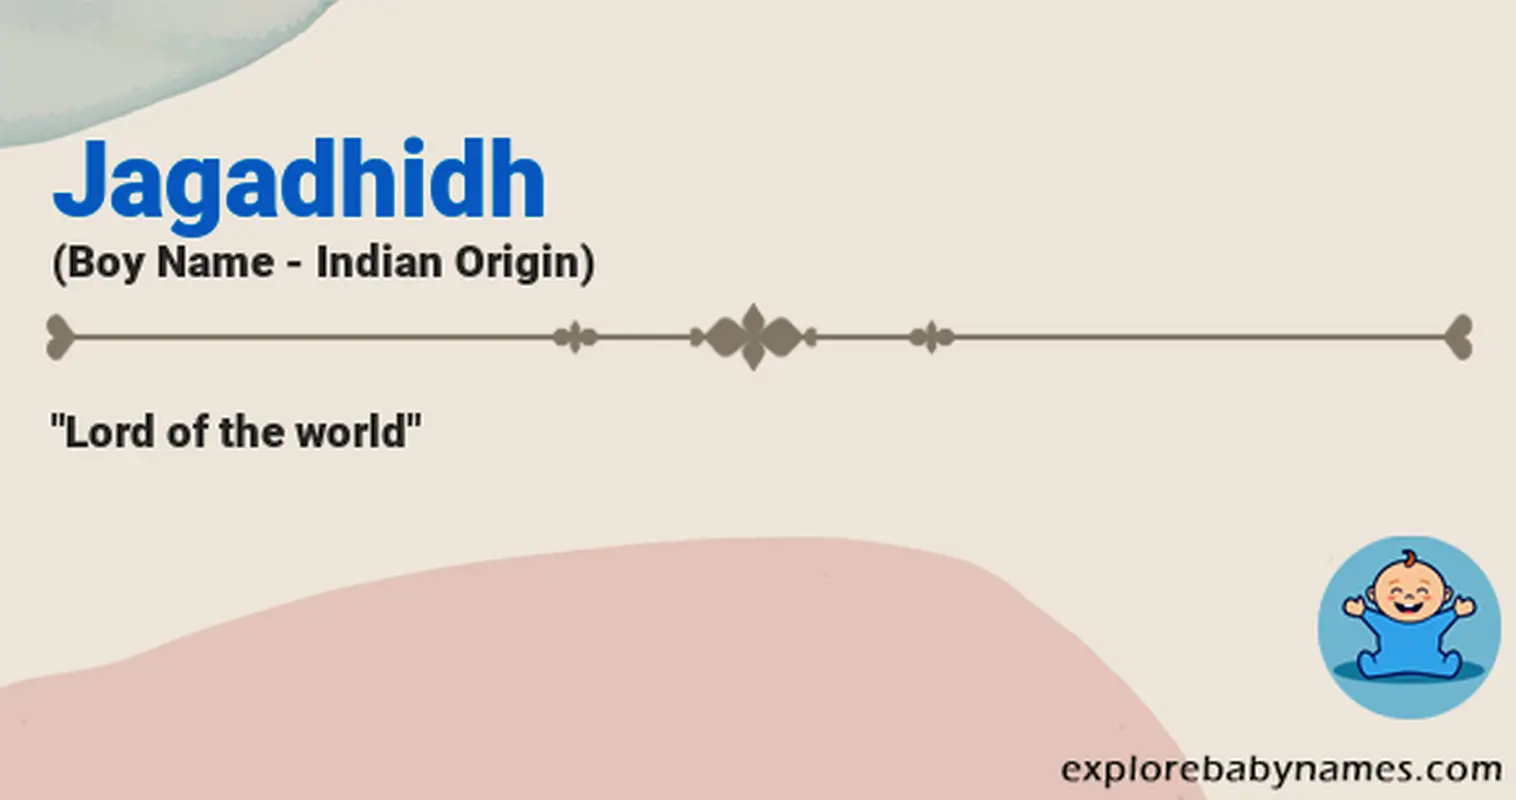 Meaning of Jagadhidh